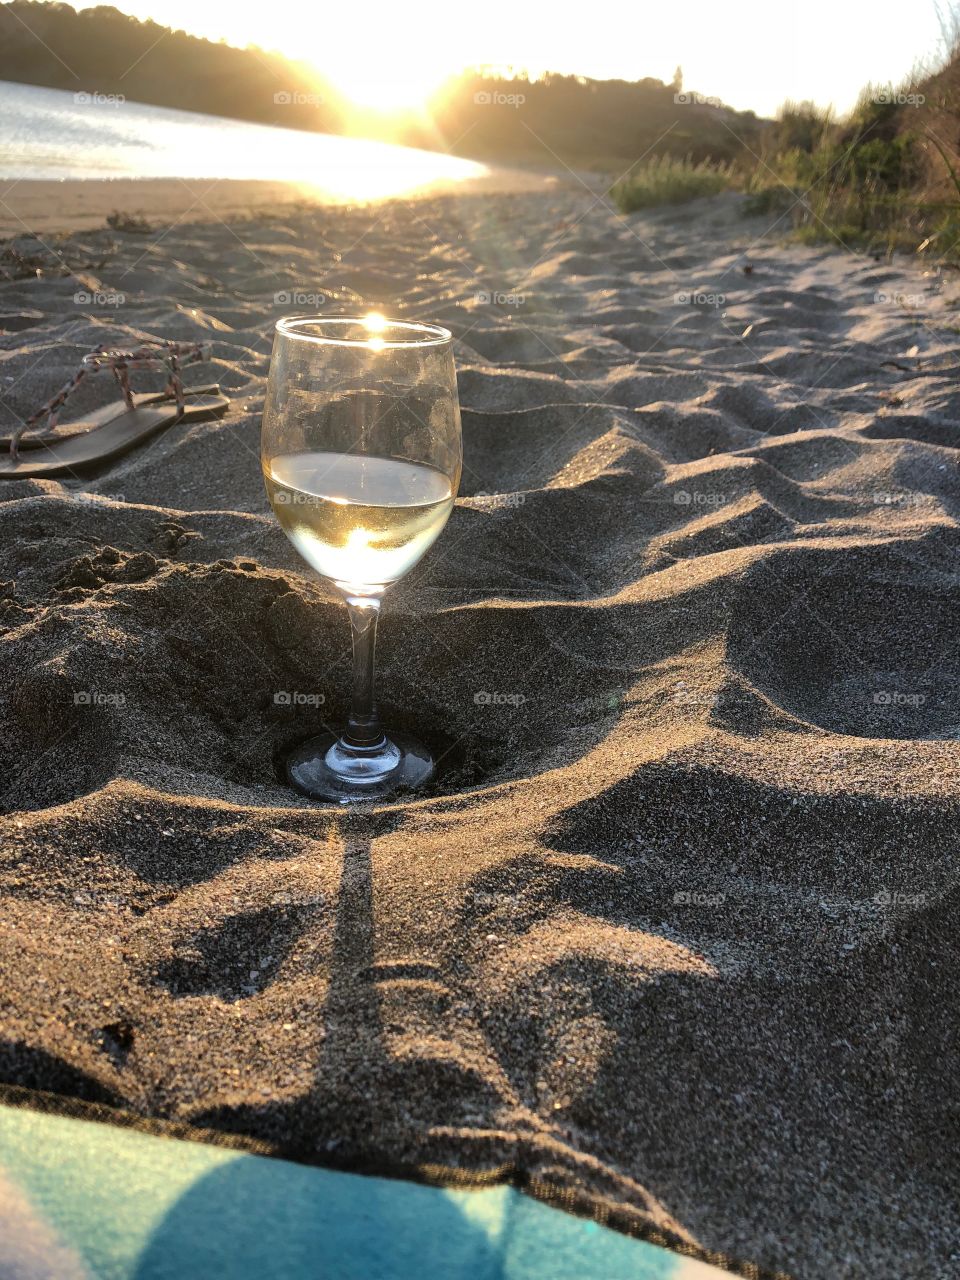 Watching the sunset with my feet in the sand and a glass of wine. What more could a girl ask for!